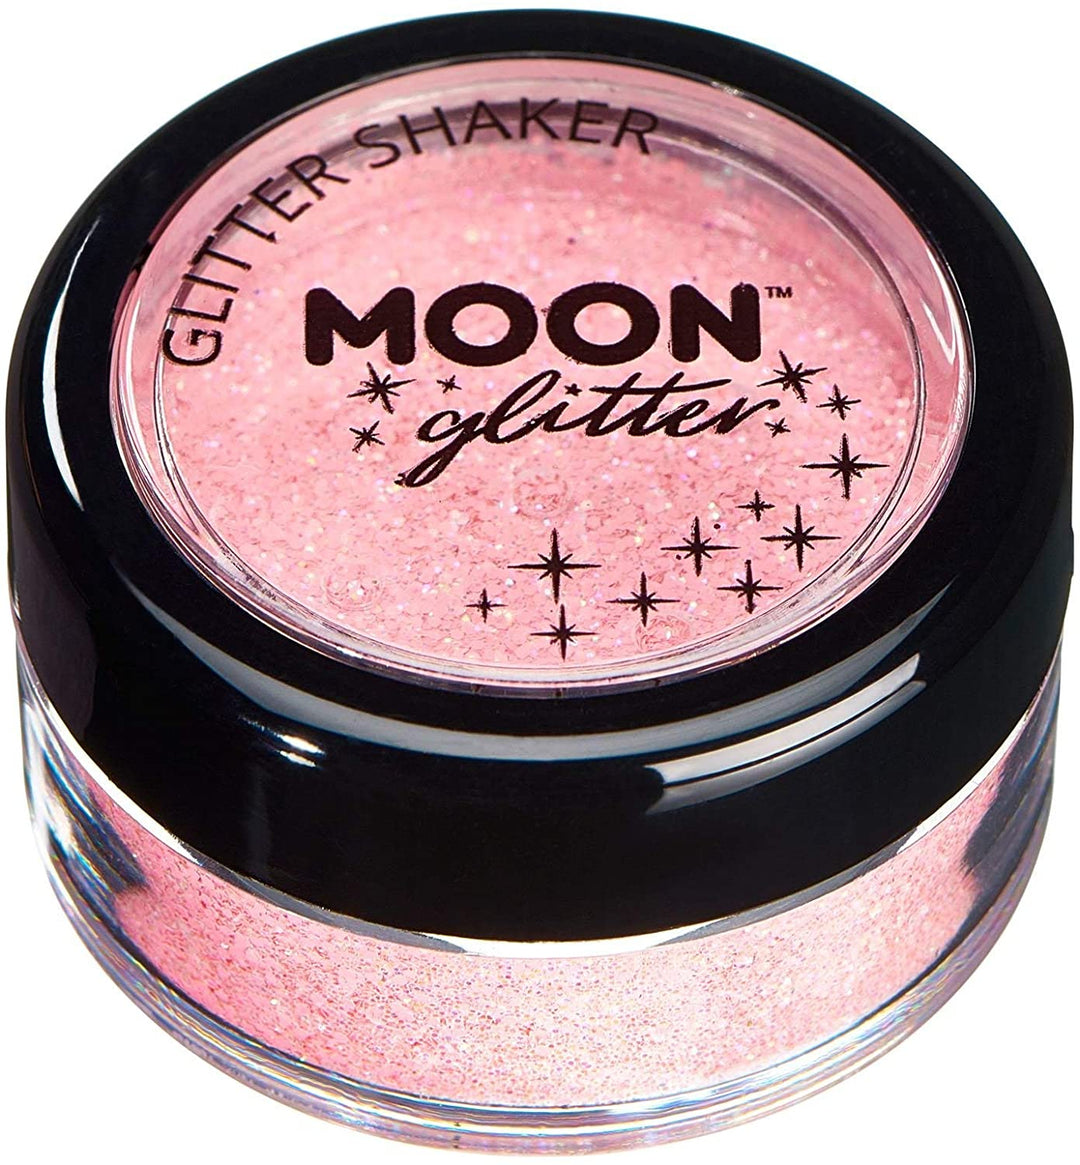 Pastel Glitter Shakers by Moon Glitter - Coral - Cosmetic Festival Makeup Glitter for Face, Body, Nails, Hair, Lips - 5g